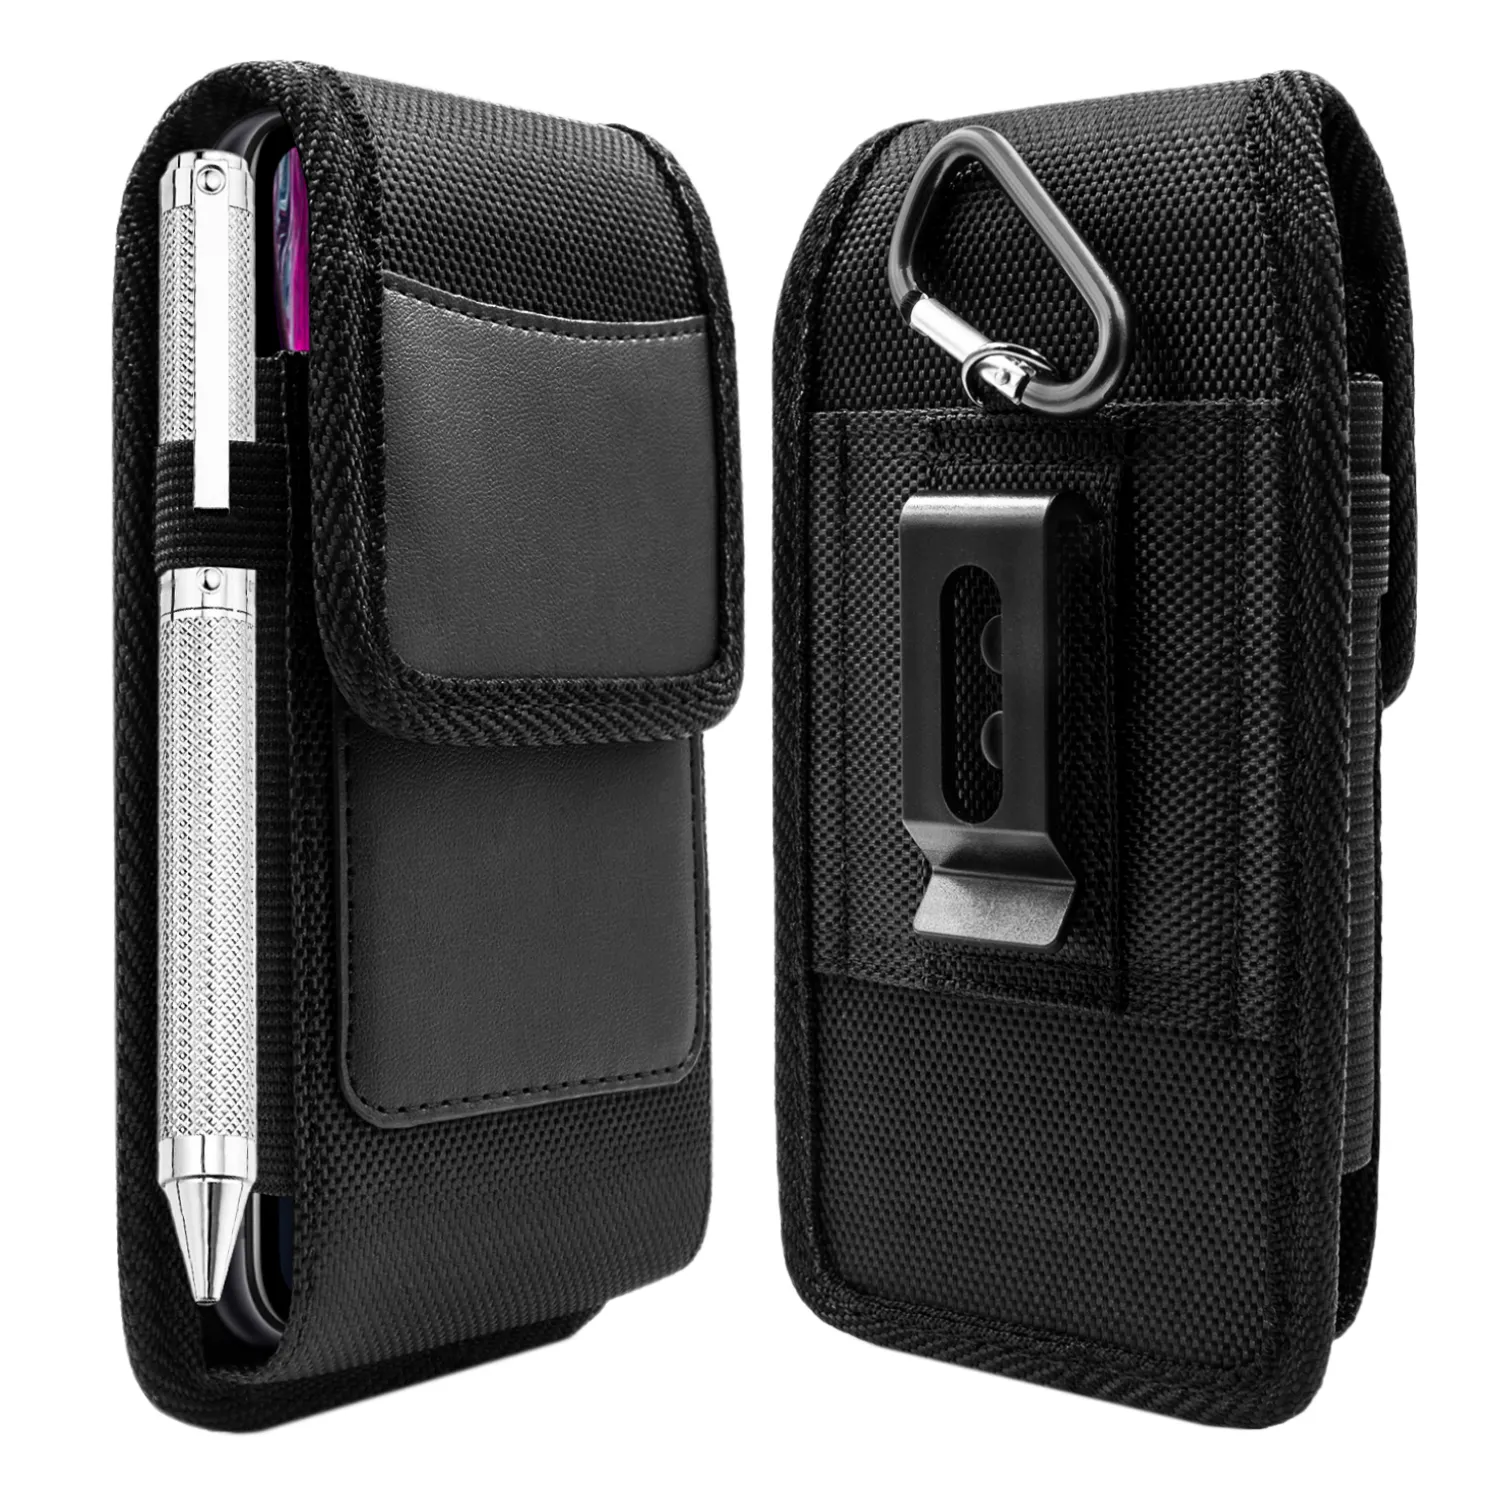 Mobile Phone Belt Pouch Universal Holster Waterproof PU Leather Nylon Travel Cover 4.5"-6.9" Security Carry Waist Bag Case